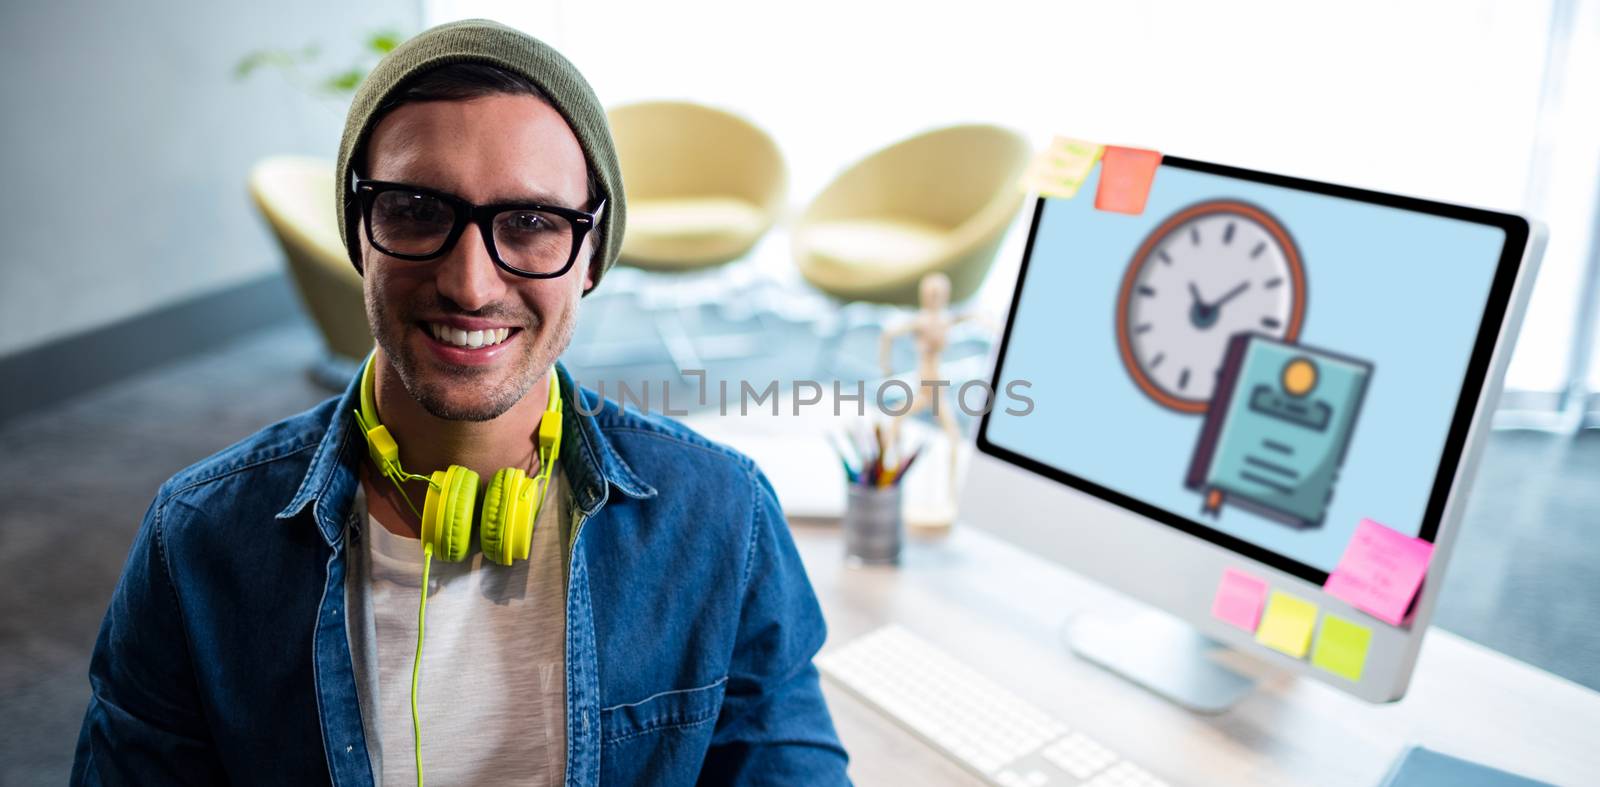 Print against man smiling while sitting on chair by computer